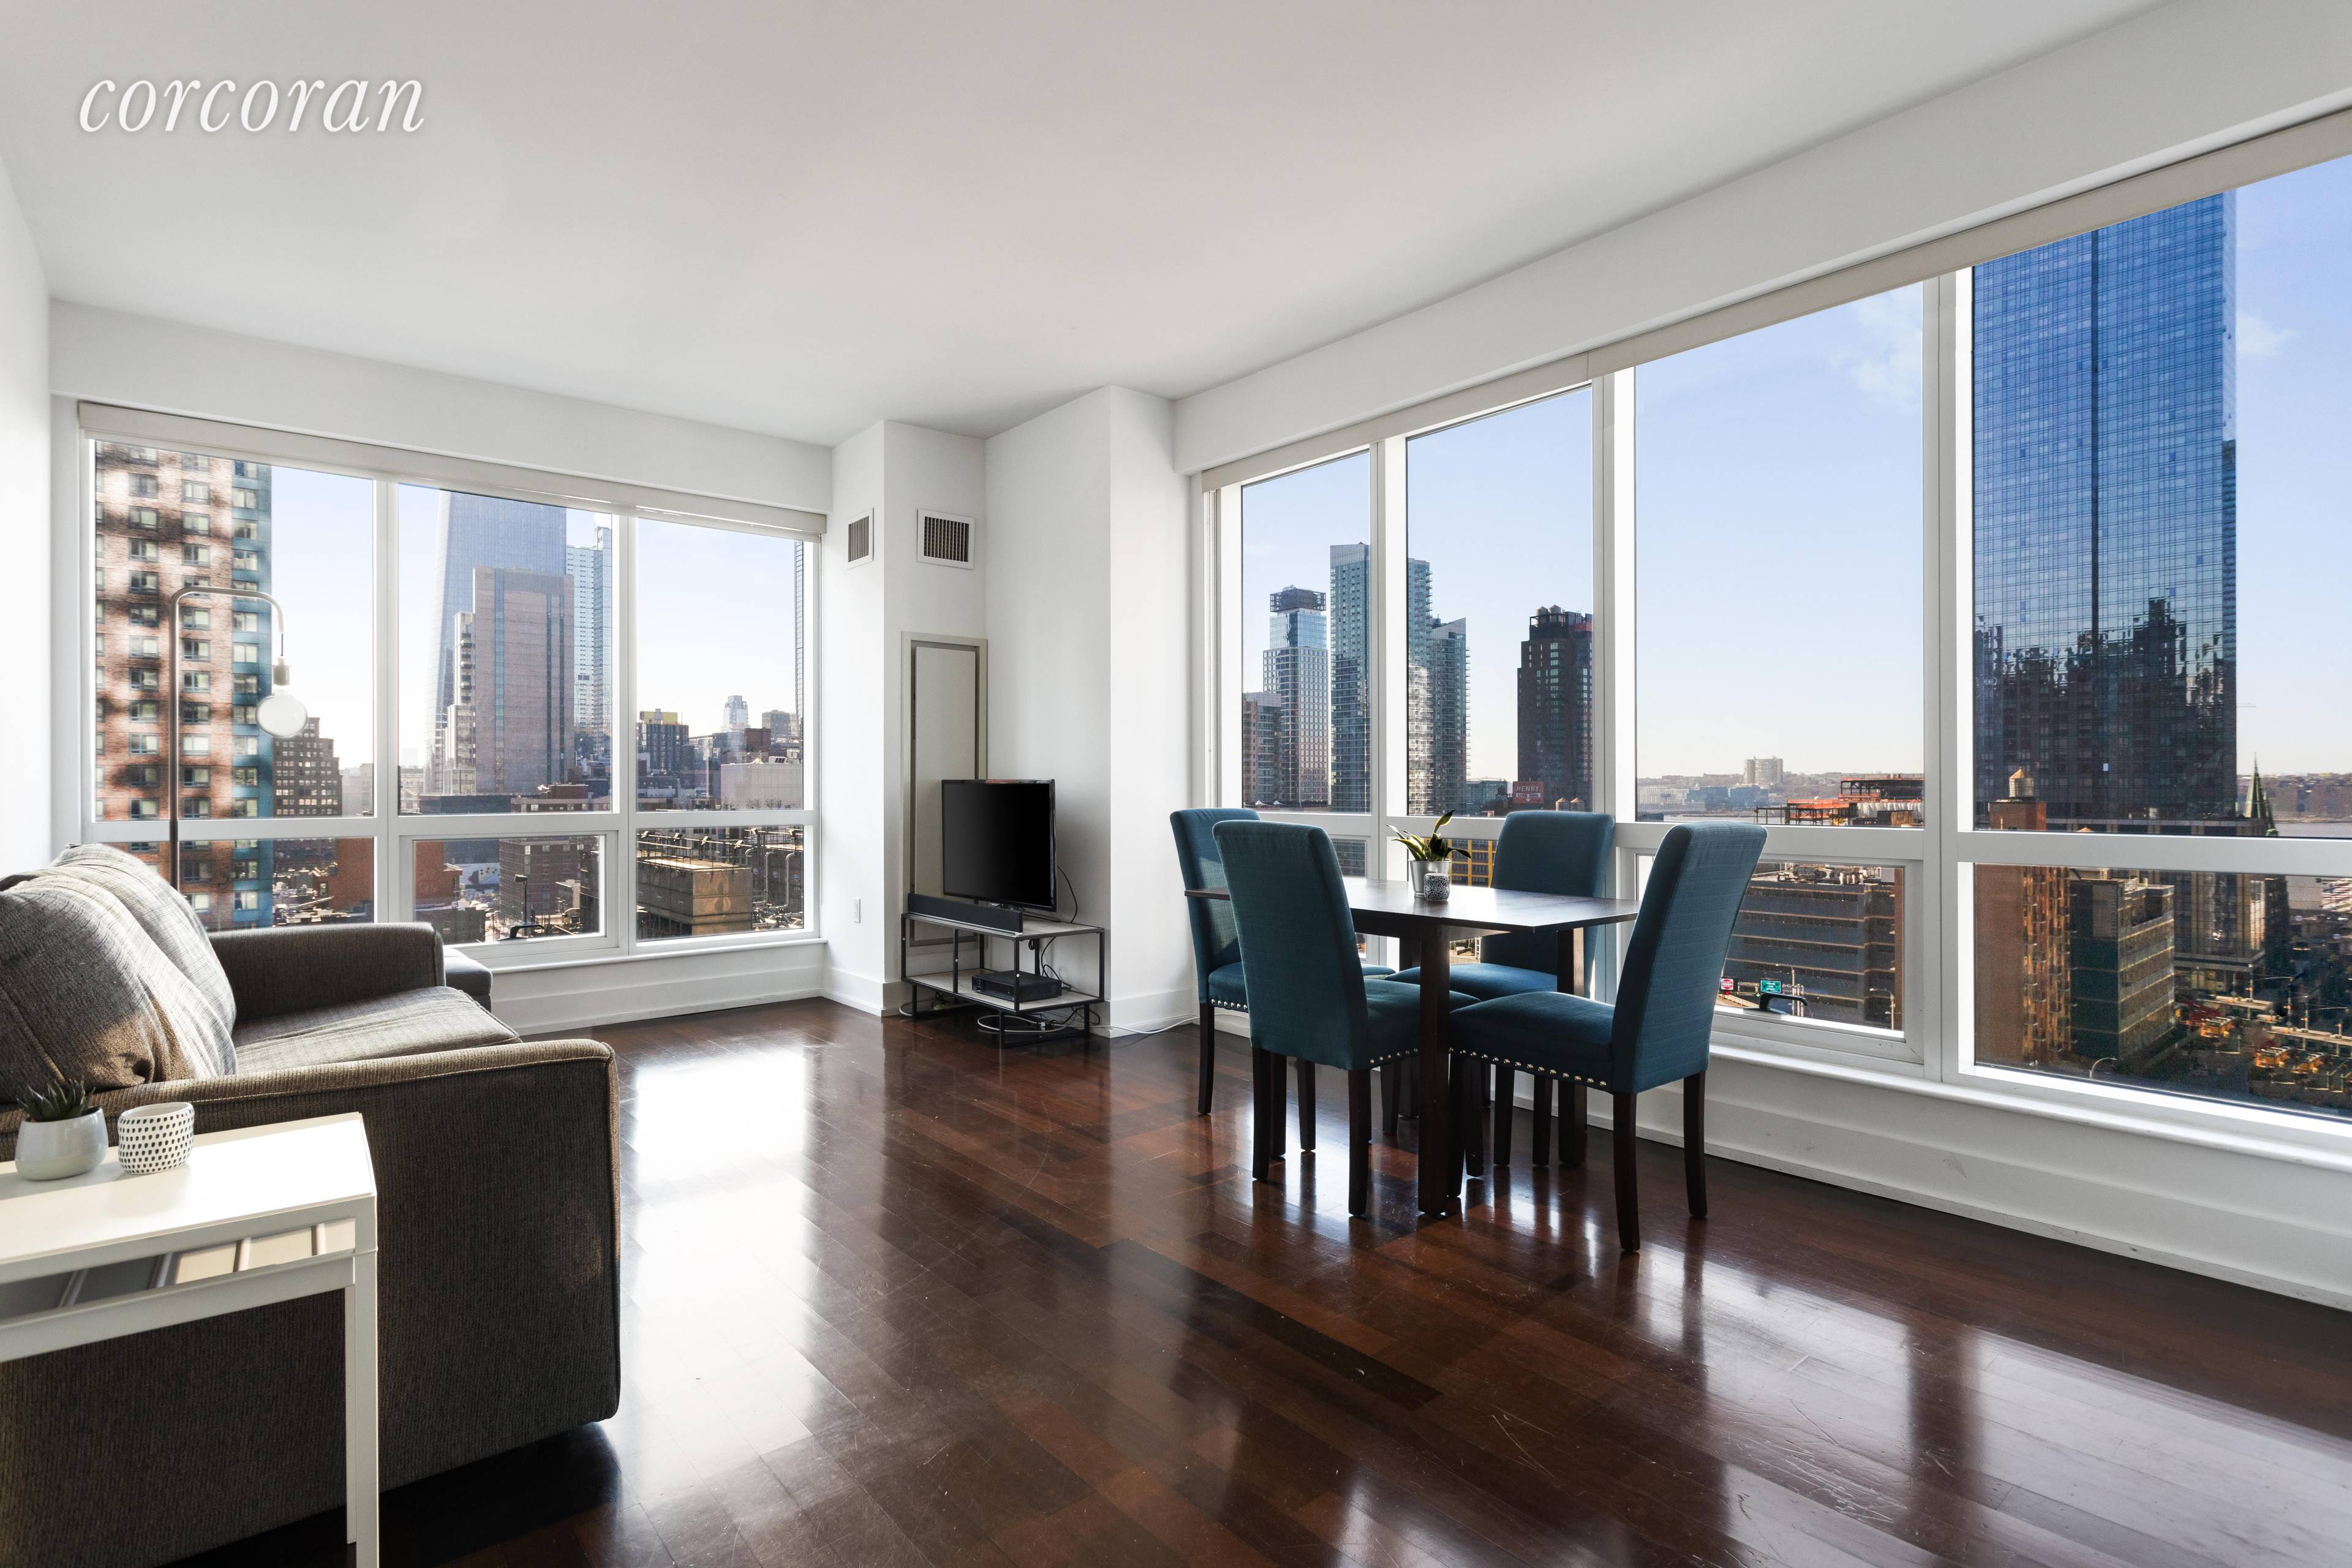 This stunning 2 bed 2 bath at The Orion, at 350 West 42nd Street is a corner unit on the 15th floor which boasts wonderful city and river views while ...